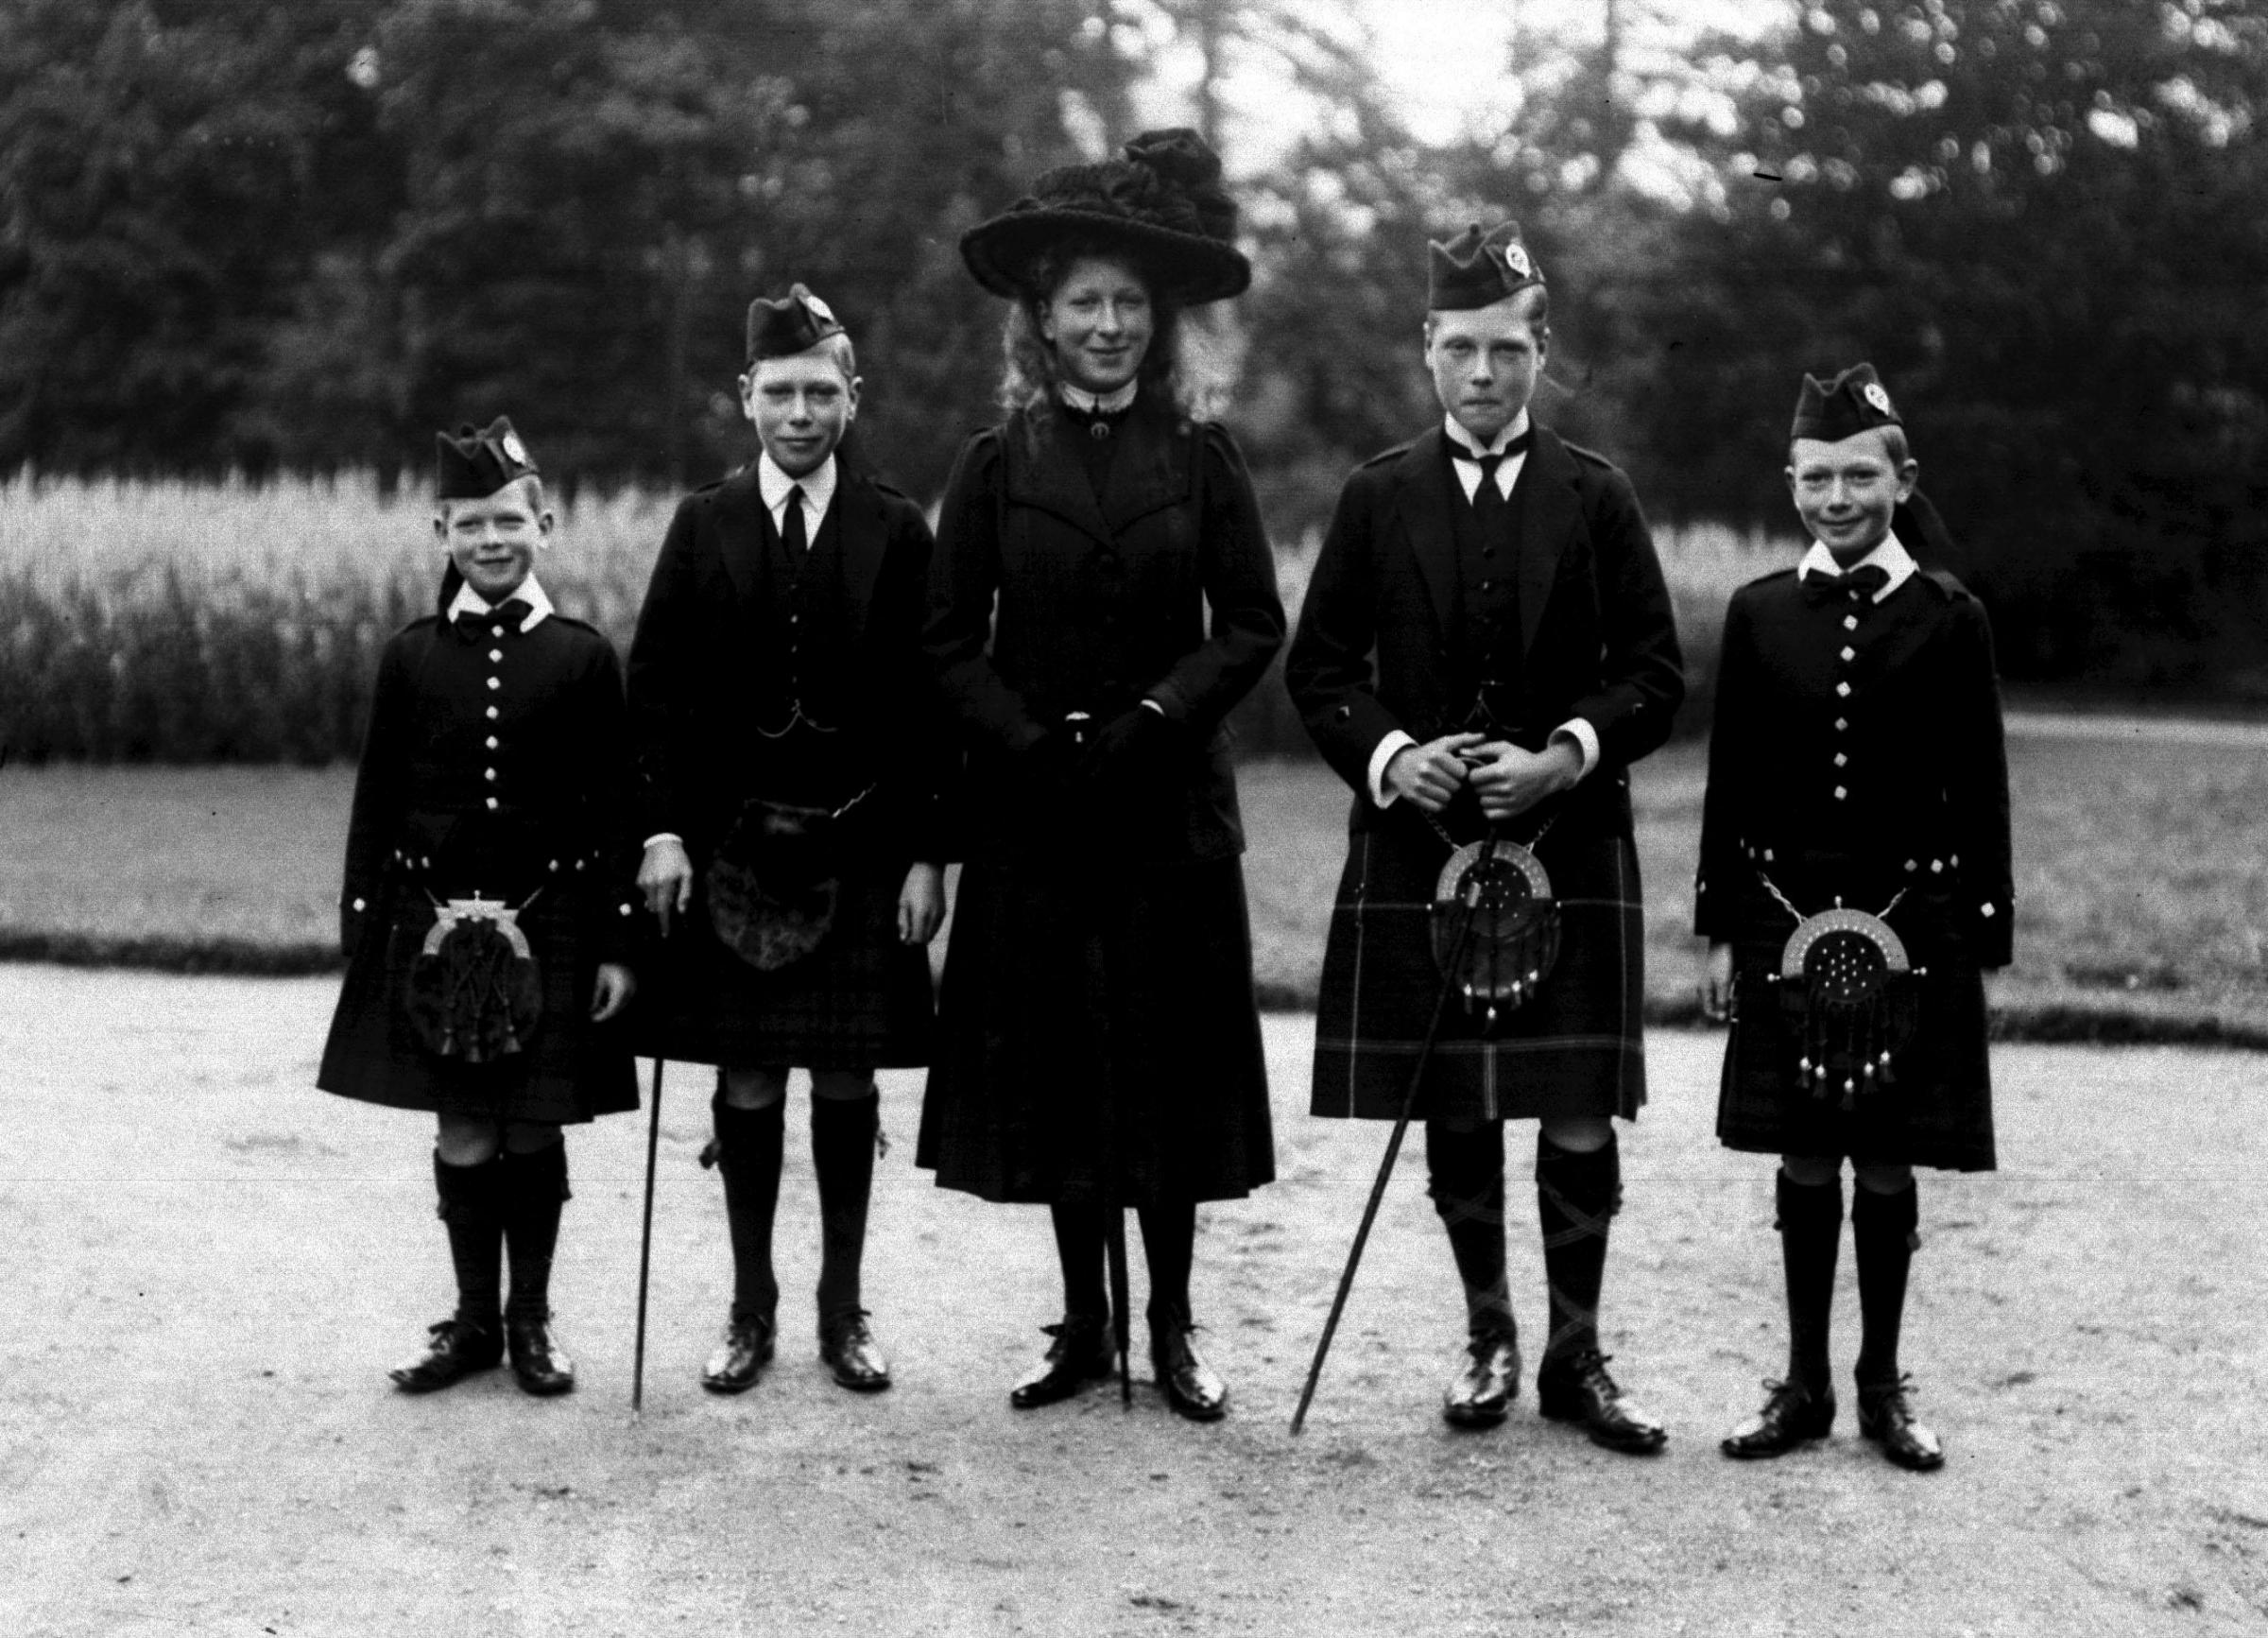 In his youth - Prince Henry (far right) was the son of Queen Mary (centre) who ruled from 1910 until 1936